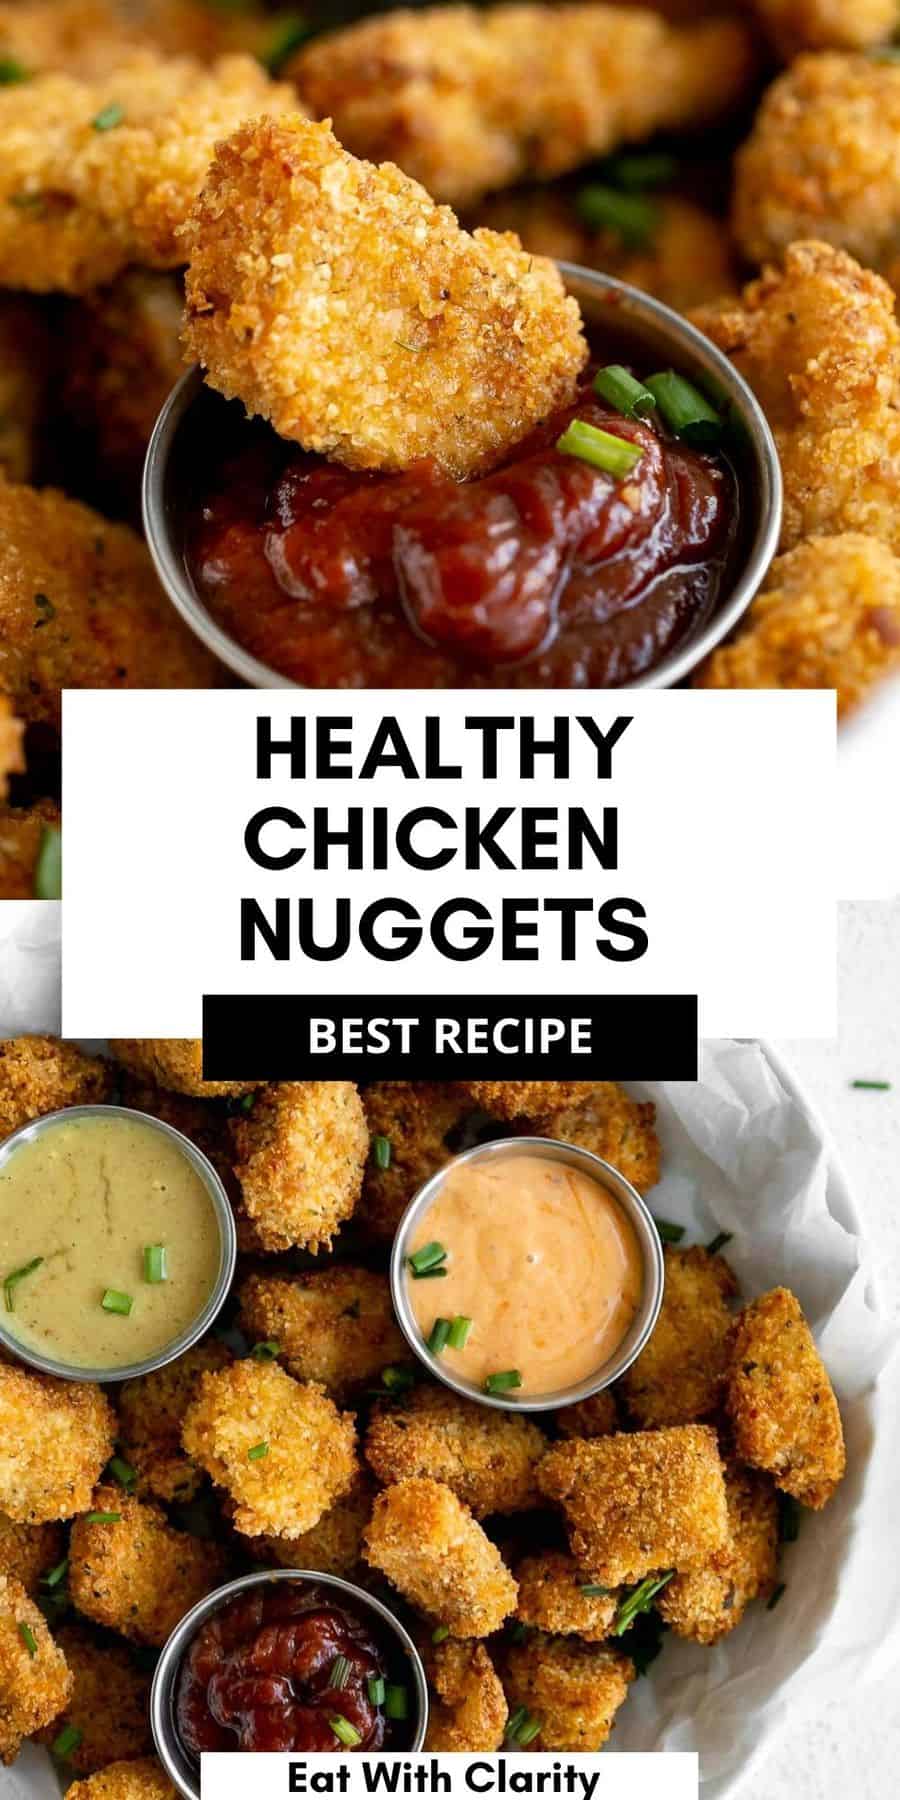 Healthy Air Fryer Chicken Nuggets - Eat With Clarity